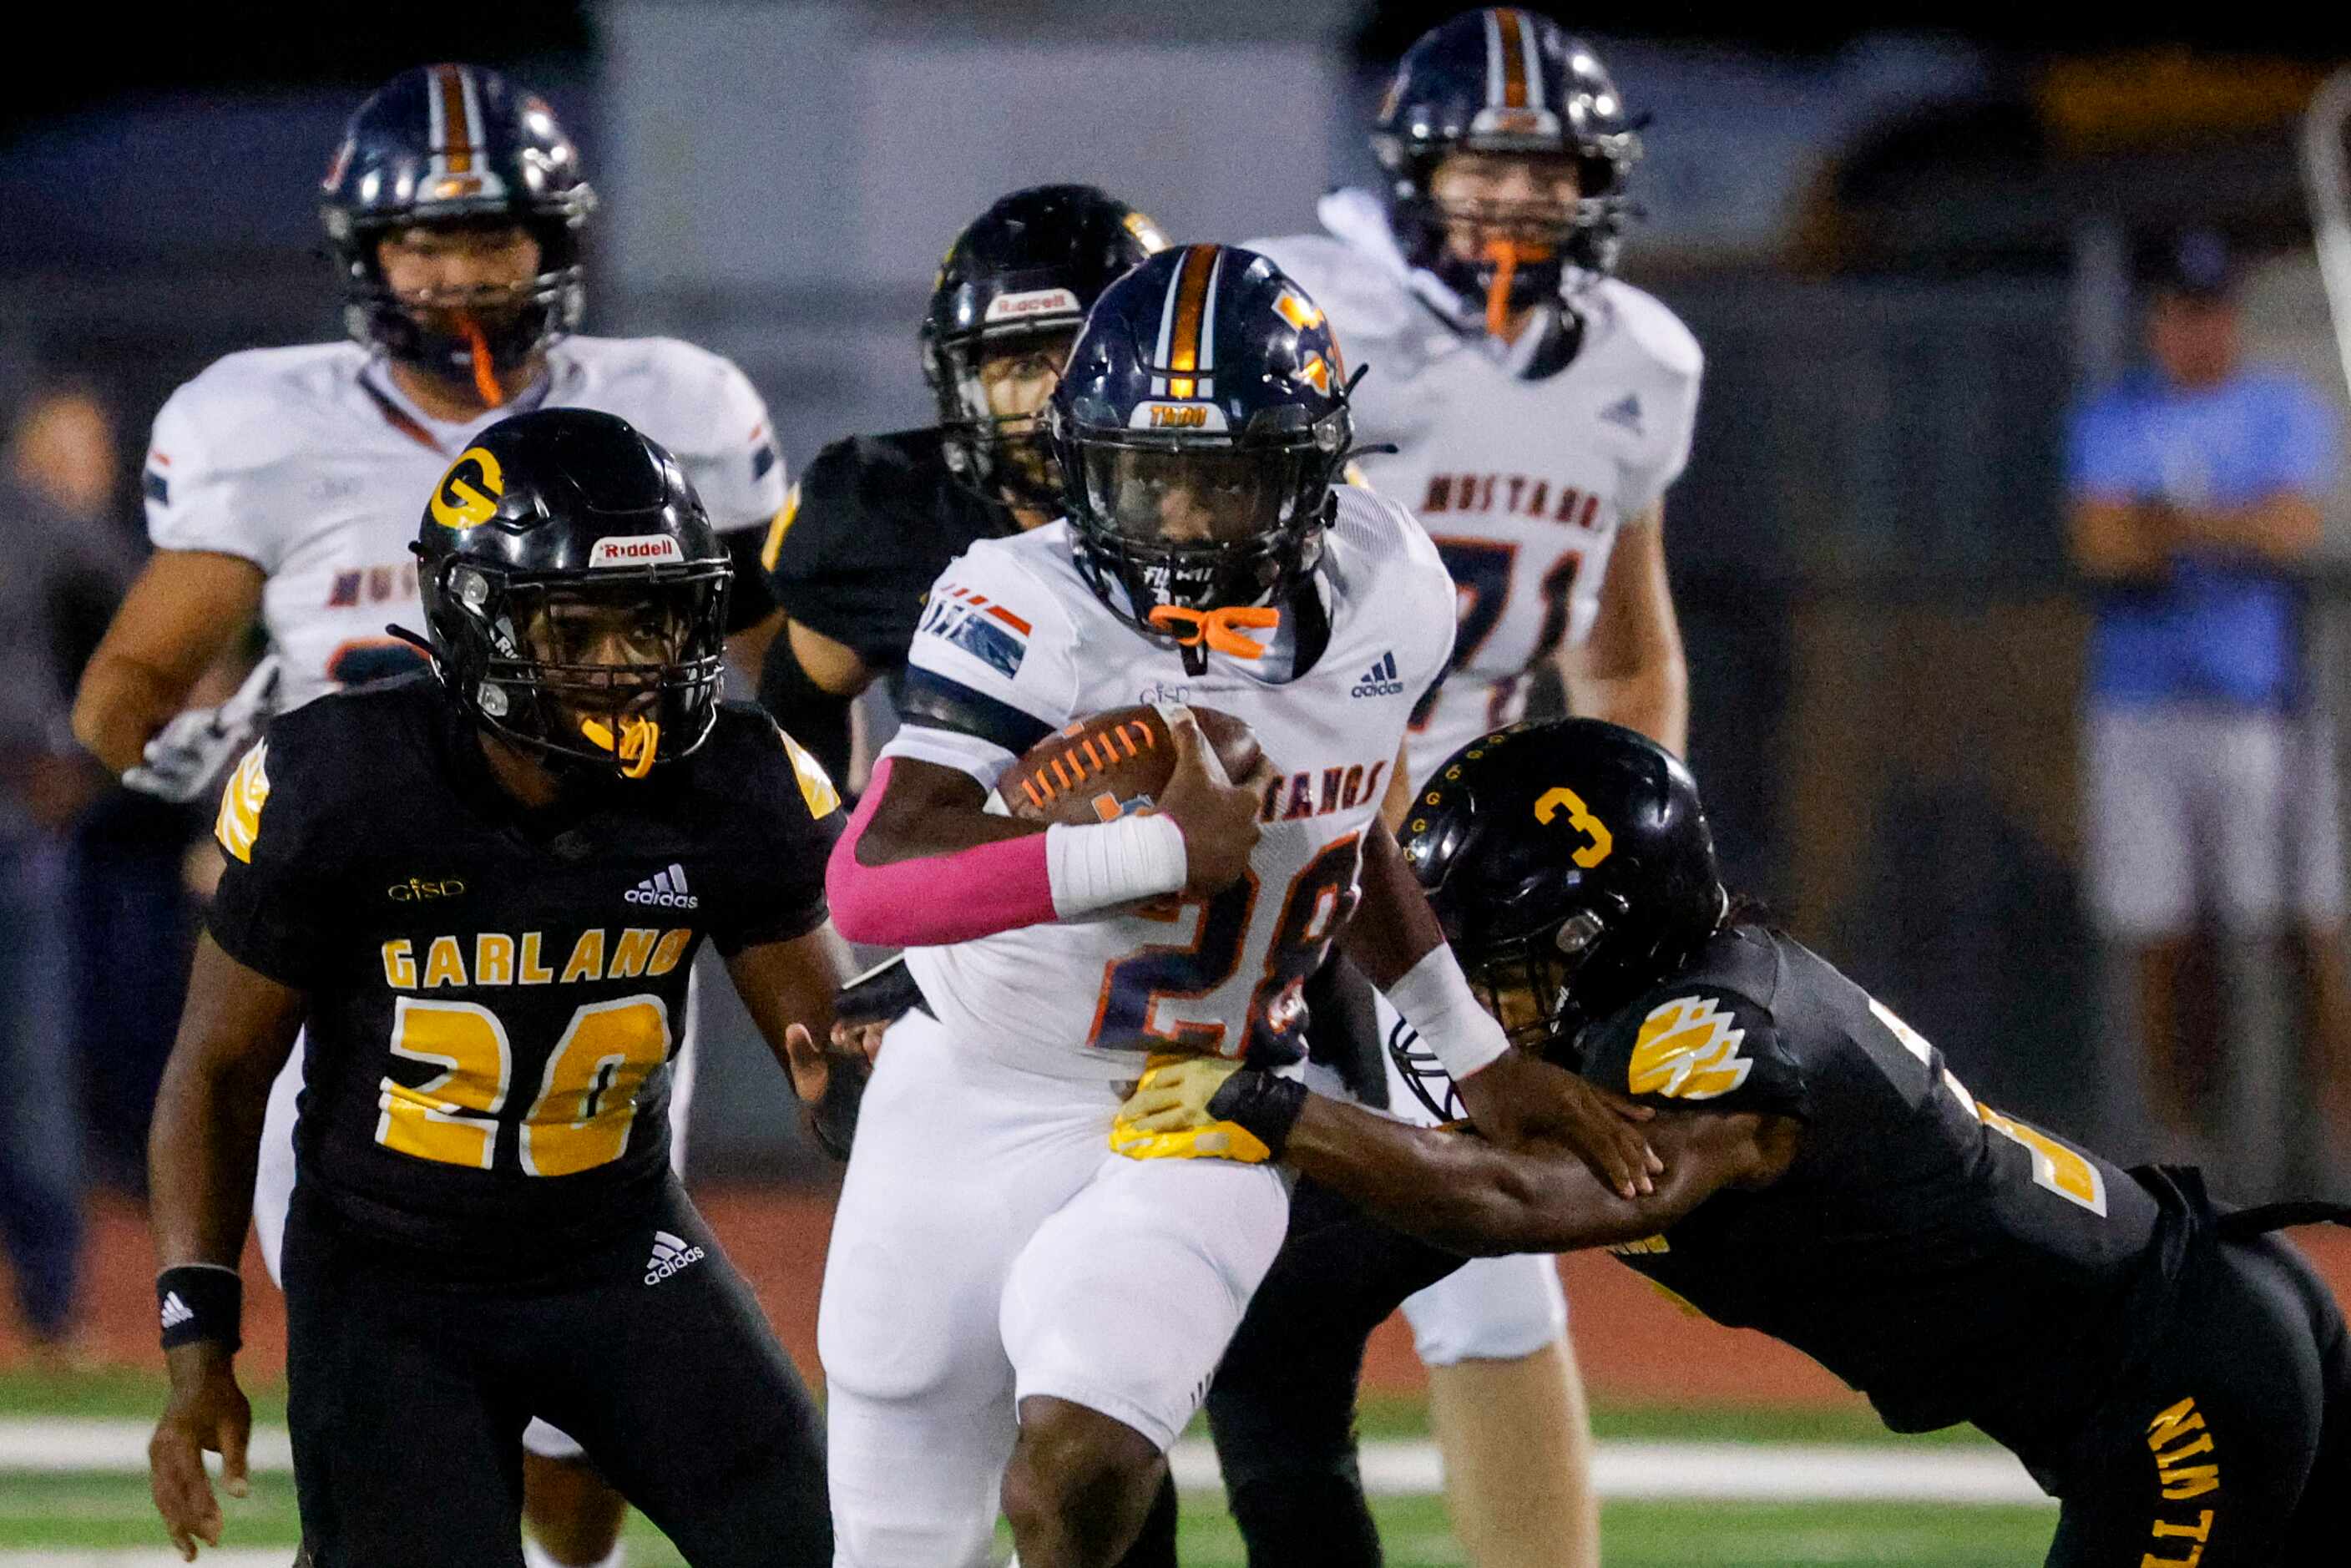 Sachse high school’s Brendon Haygood (28) runs with the ball past Garland high school’s...